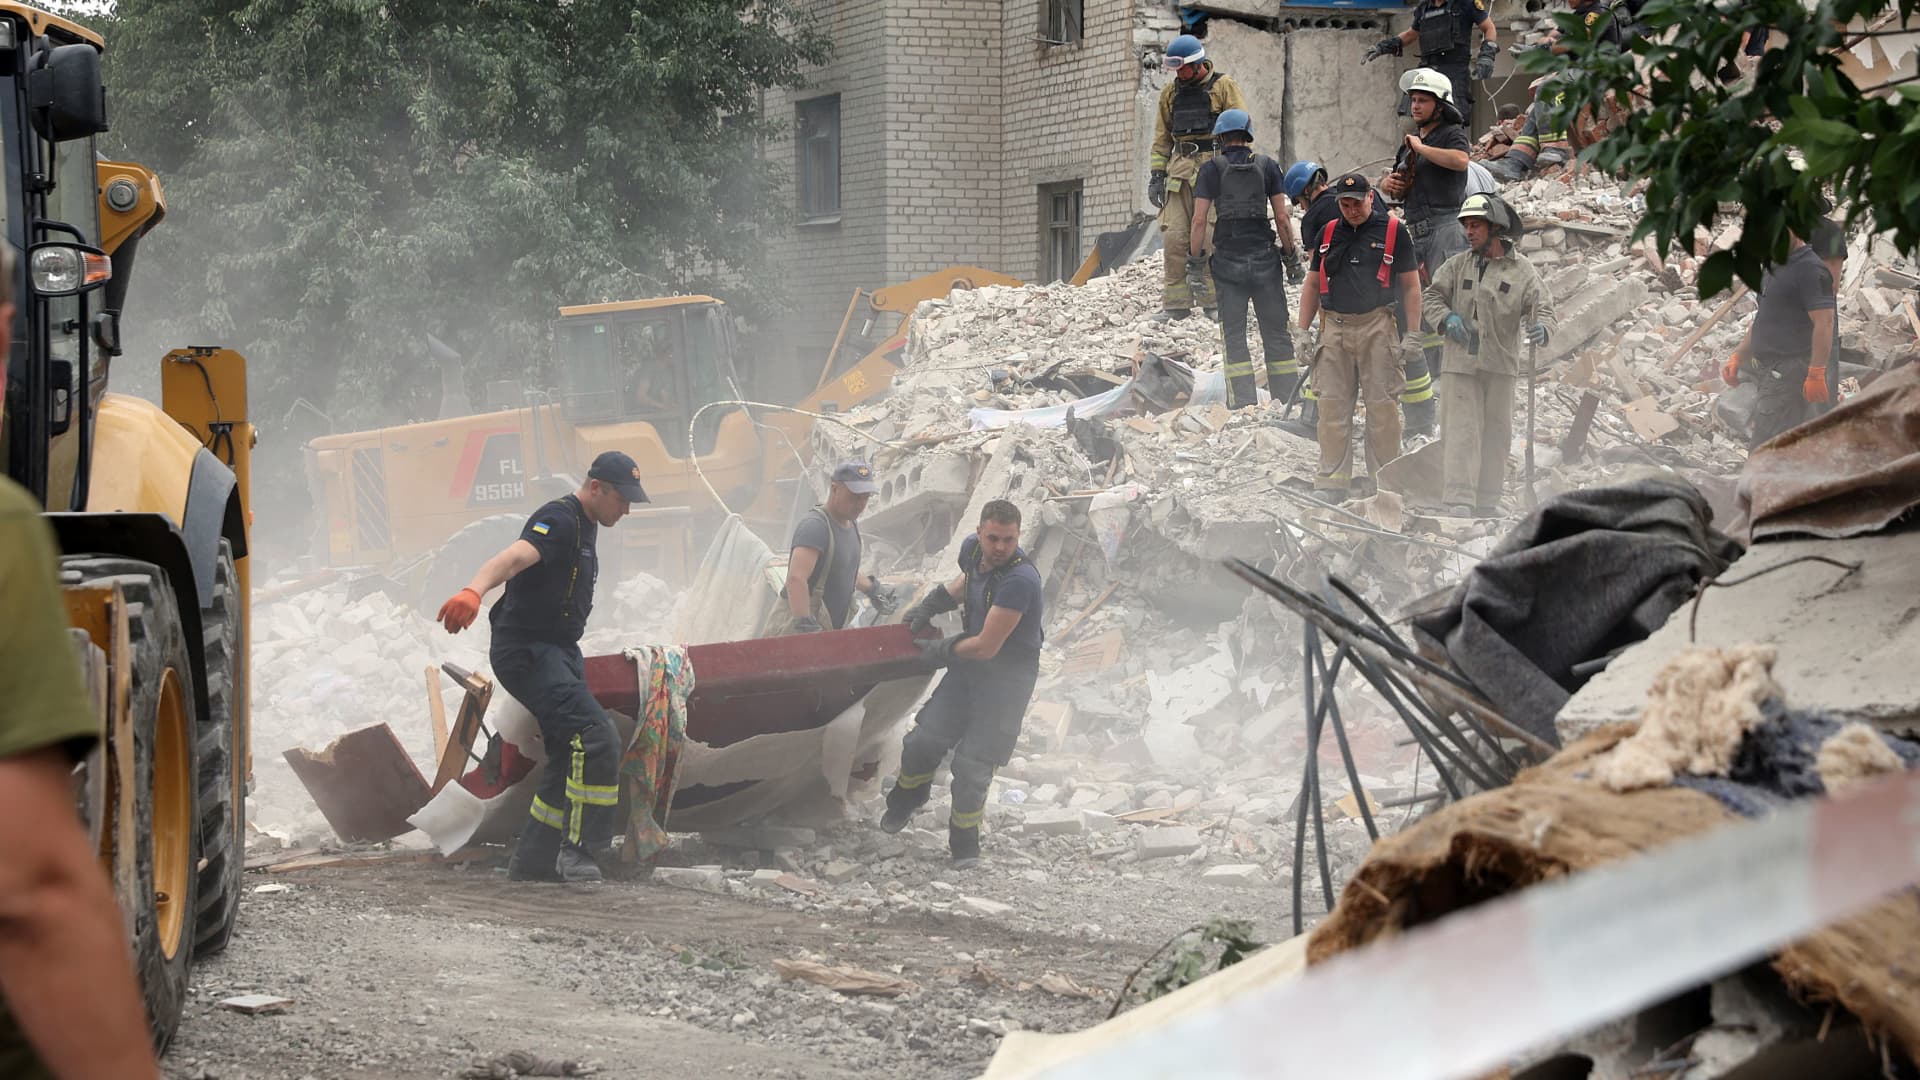 Rescuers clear the scene after a building was partially destroyed following shelling in Chasiv Yar, eastern Ukraine, on July 10, 2022. The building was hit by a Russian Hurricane missile, Pavlo Kyrylenko, governor of the Donetsk region that the Russian army is seeking to conquer, said on July 10, 2022 on Telegram.